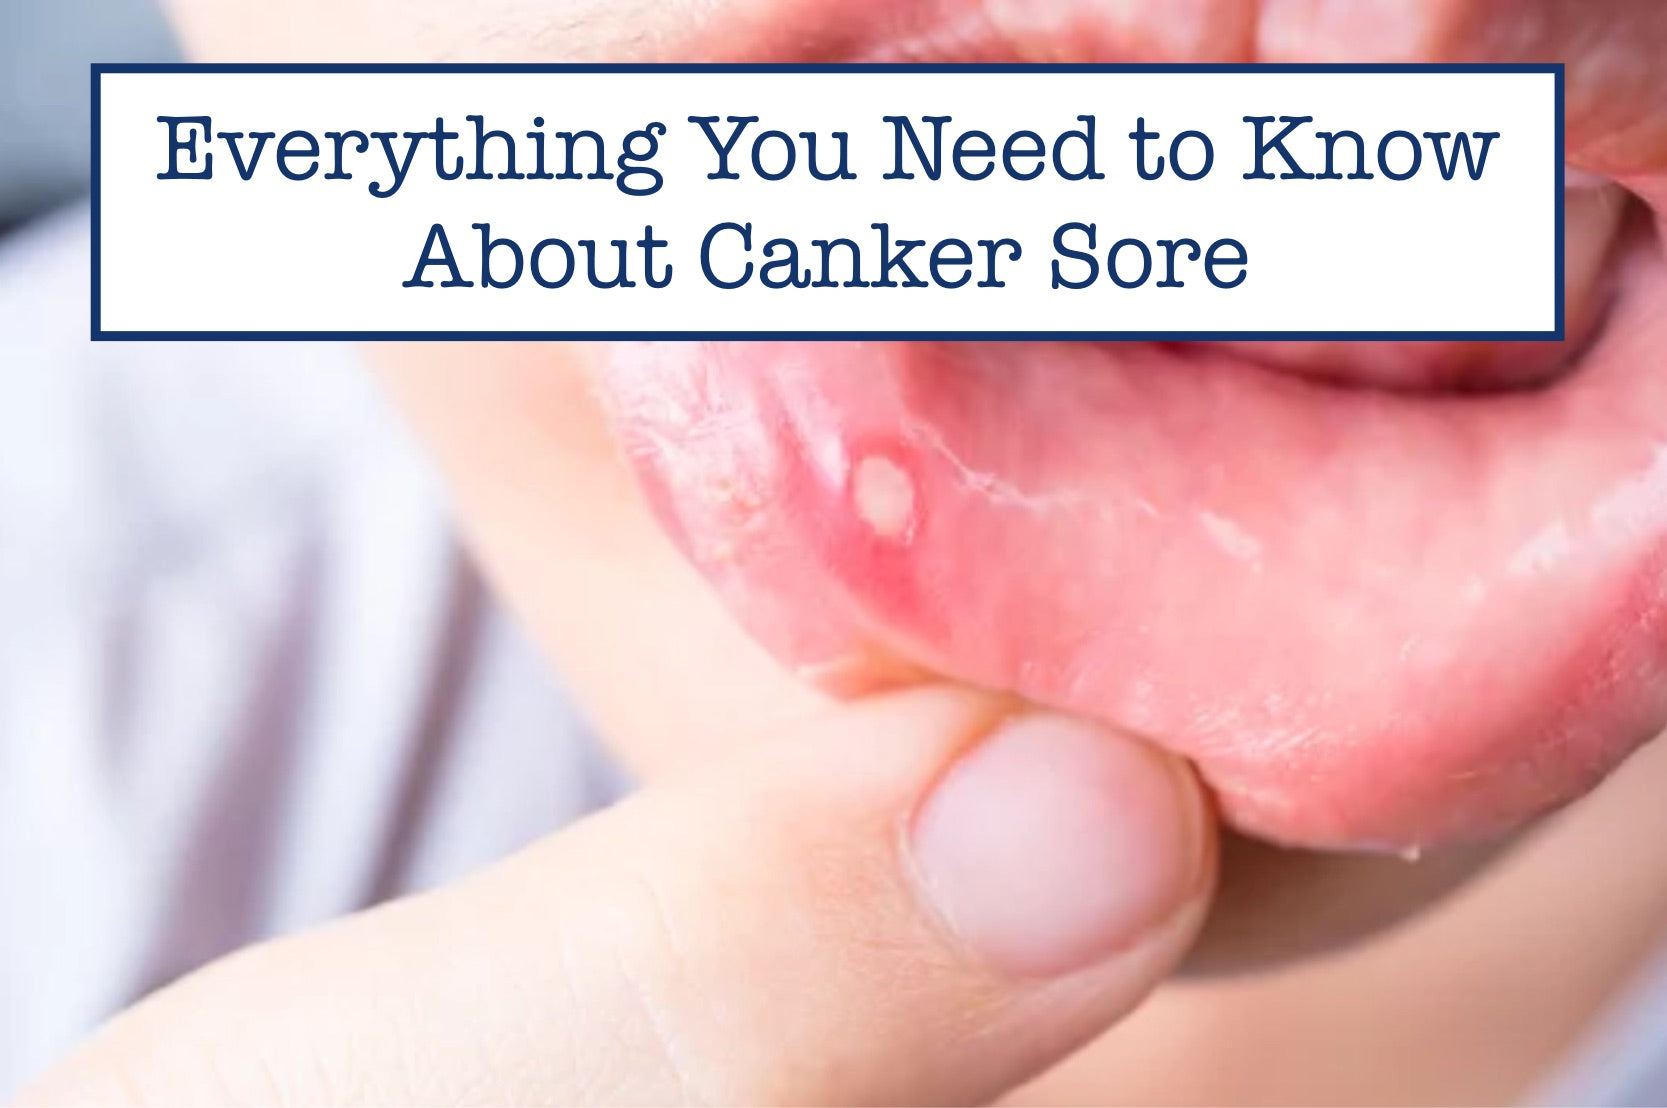 Everything You Need to Know About Canker Sore